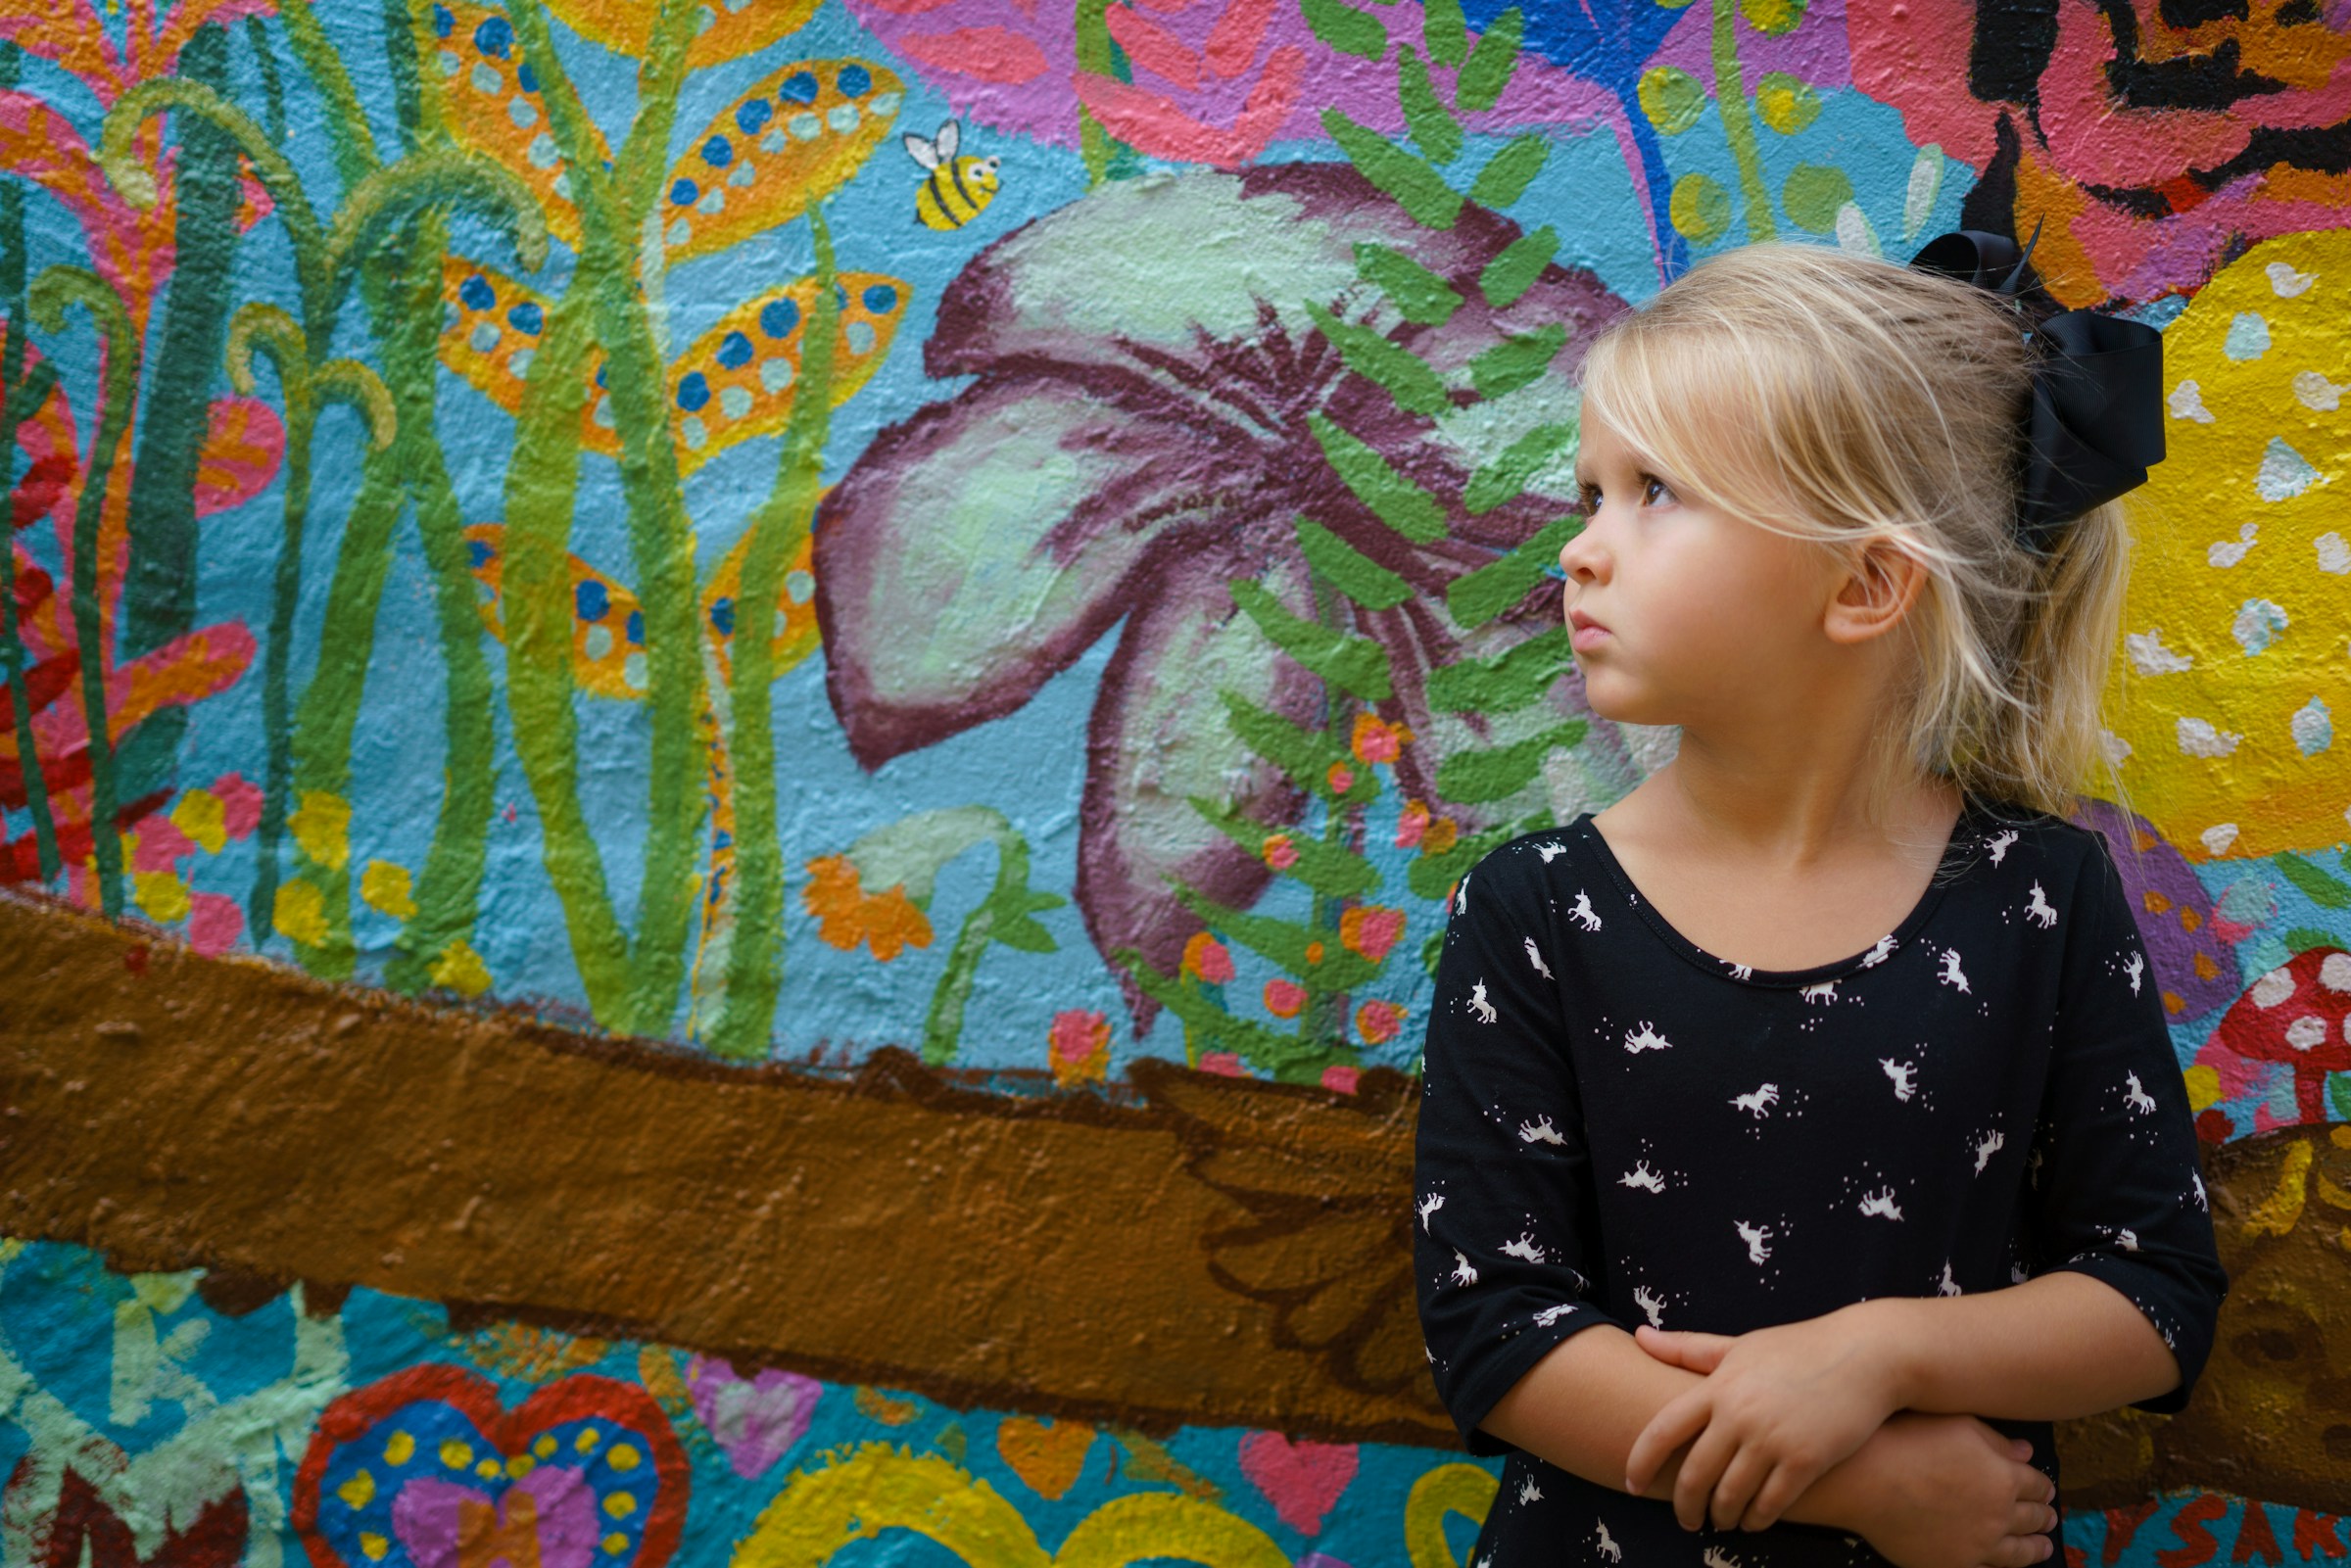 A little girl standing against a floral background | Source: Unsplash